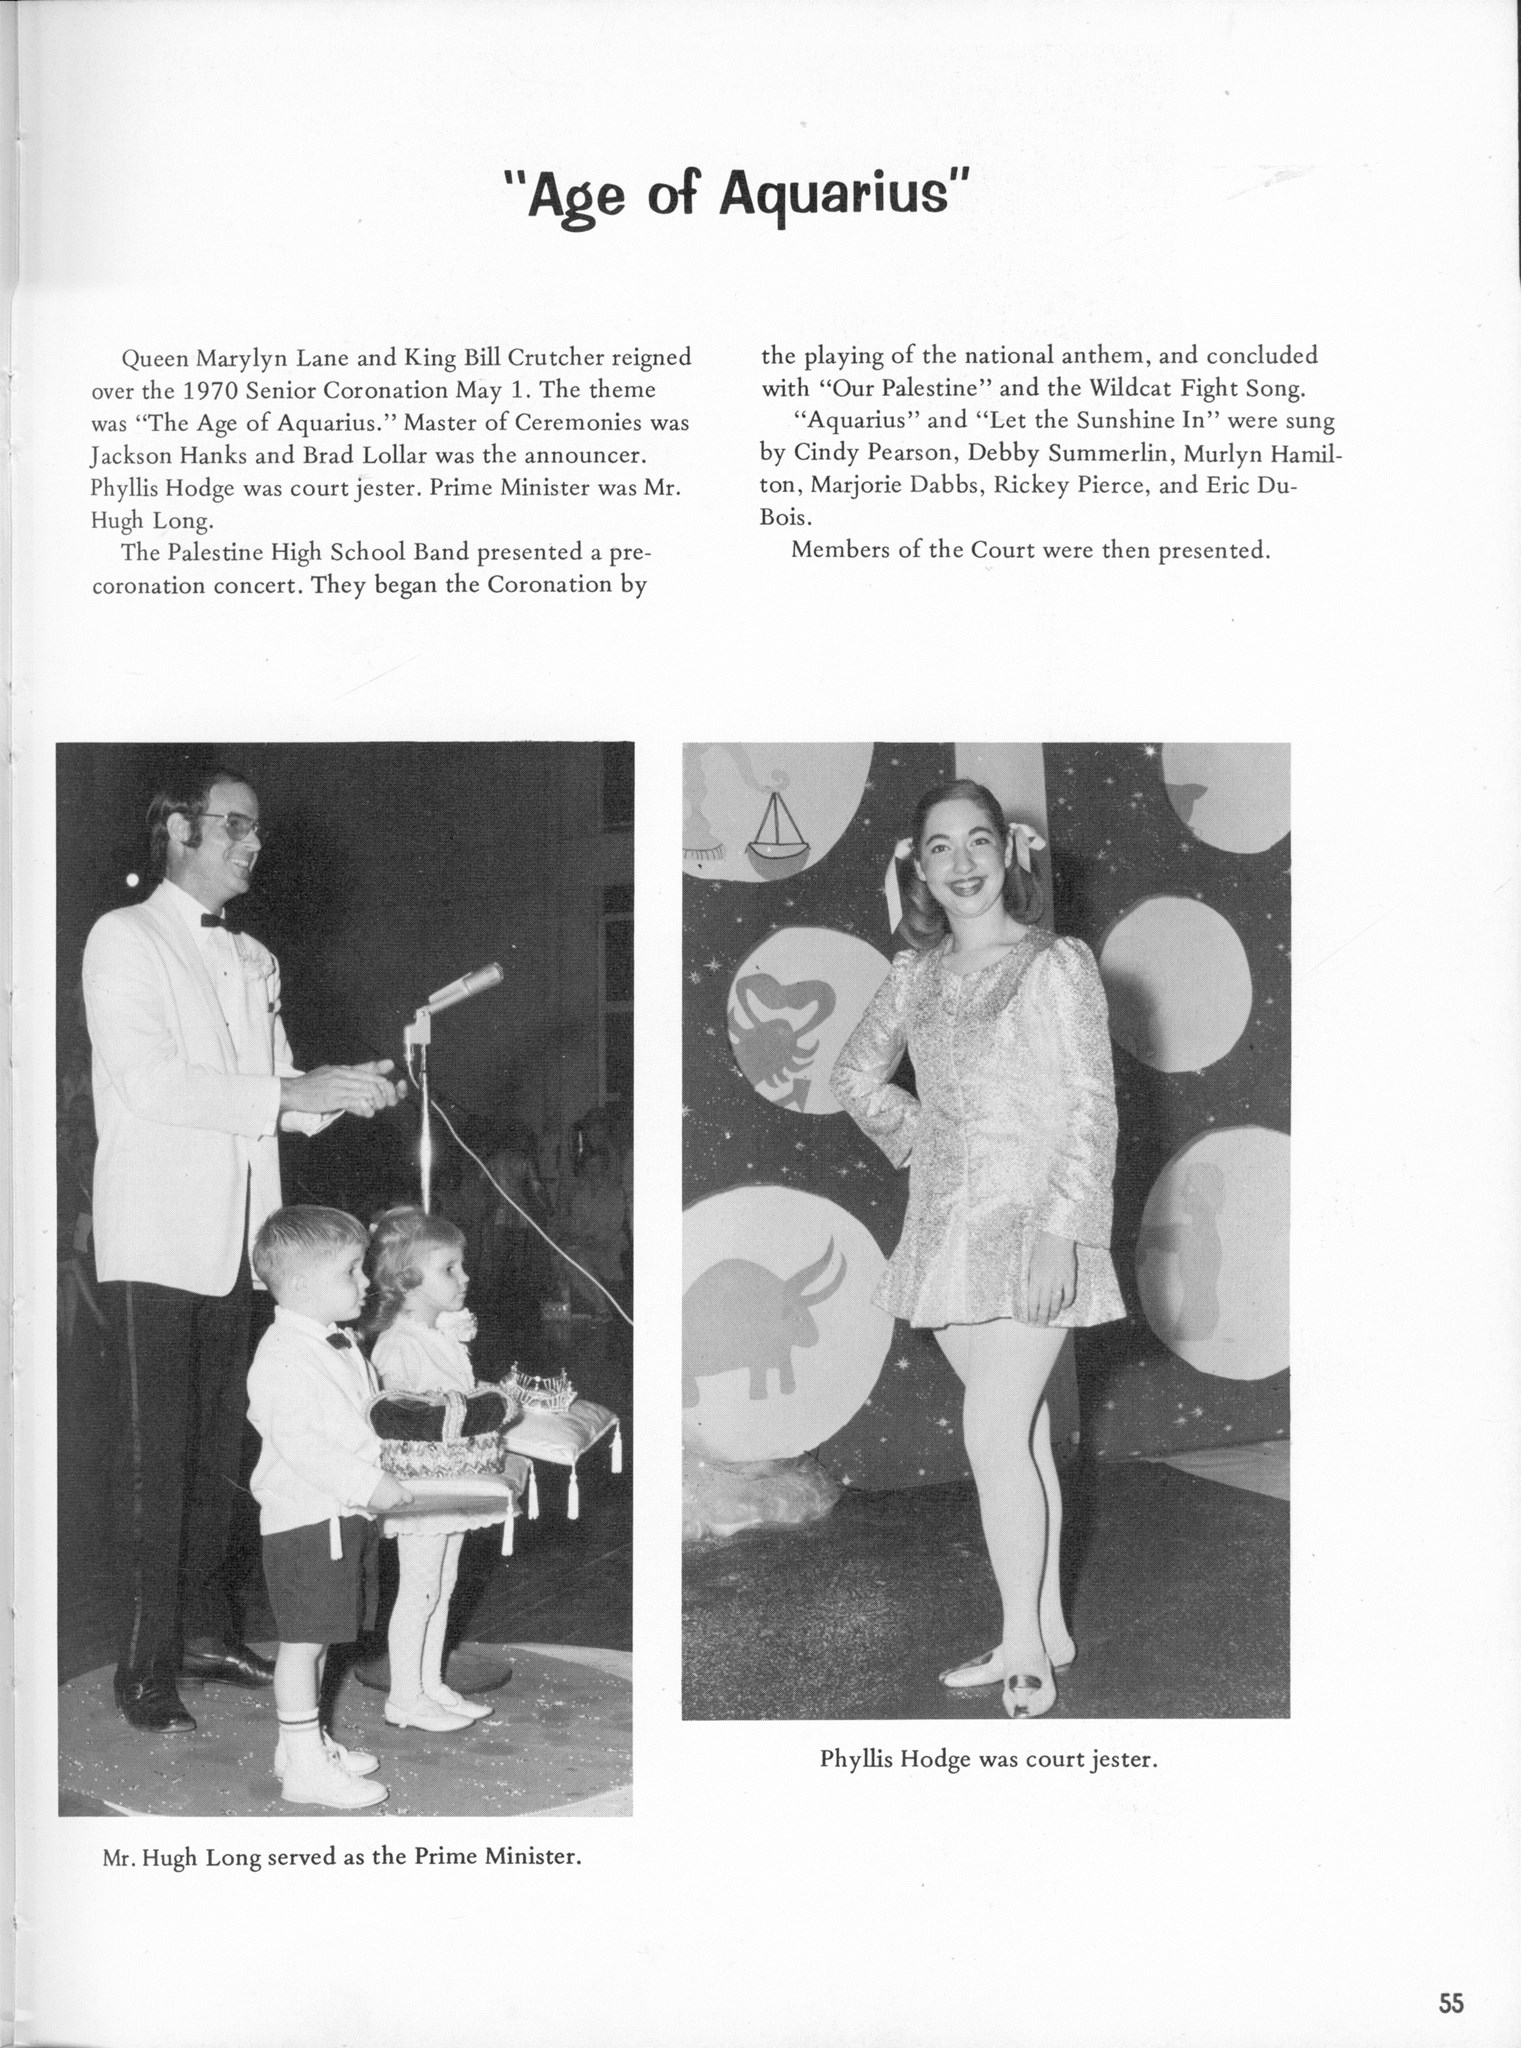 ../../../Images/Large/1970/Arclight-1970-pg0055.jpg